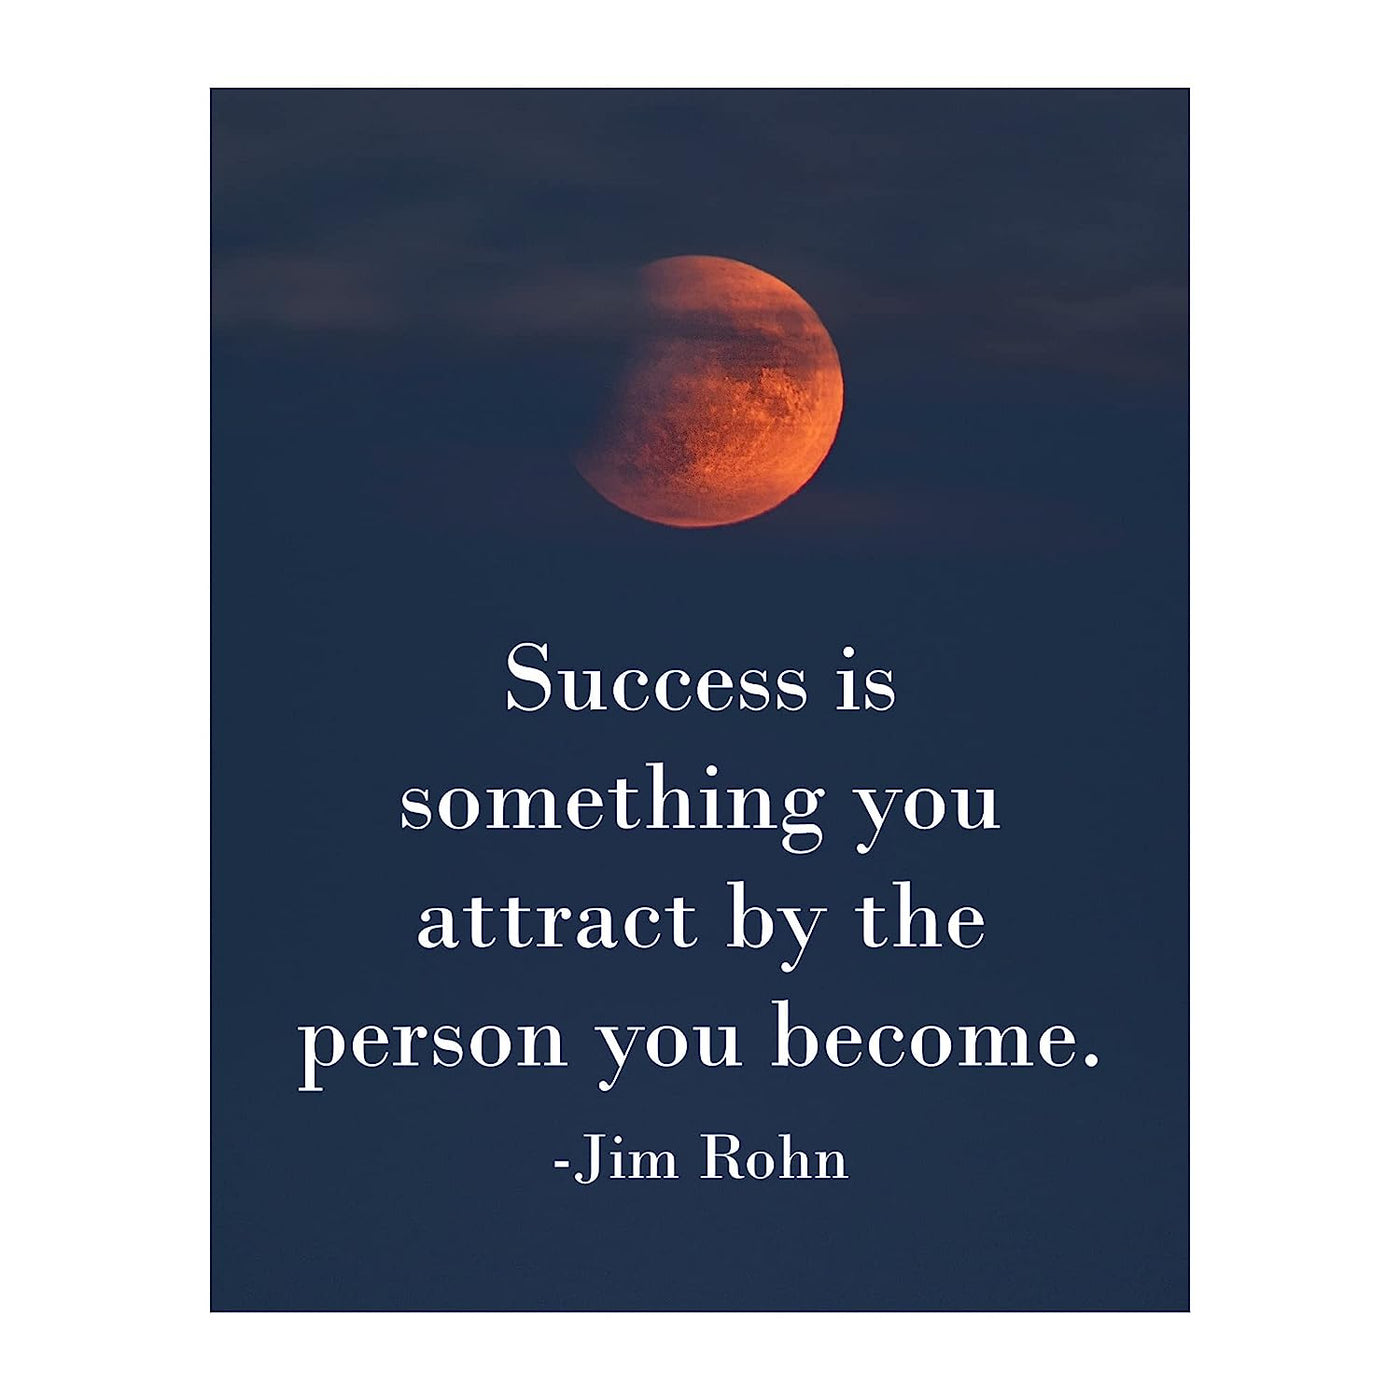 Jim Rohn-"Success Is Something You Attract"- Motivational Quotes Wall Art -8 x 10" Inspirational Sunset Print-Ready to Frame. Ideal for Home-School-Office-Gym Modern Decor. Great Gift of Motivation!